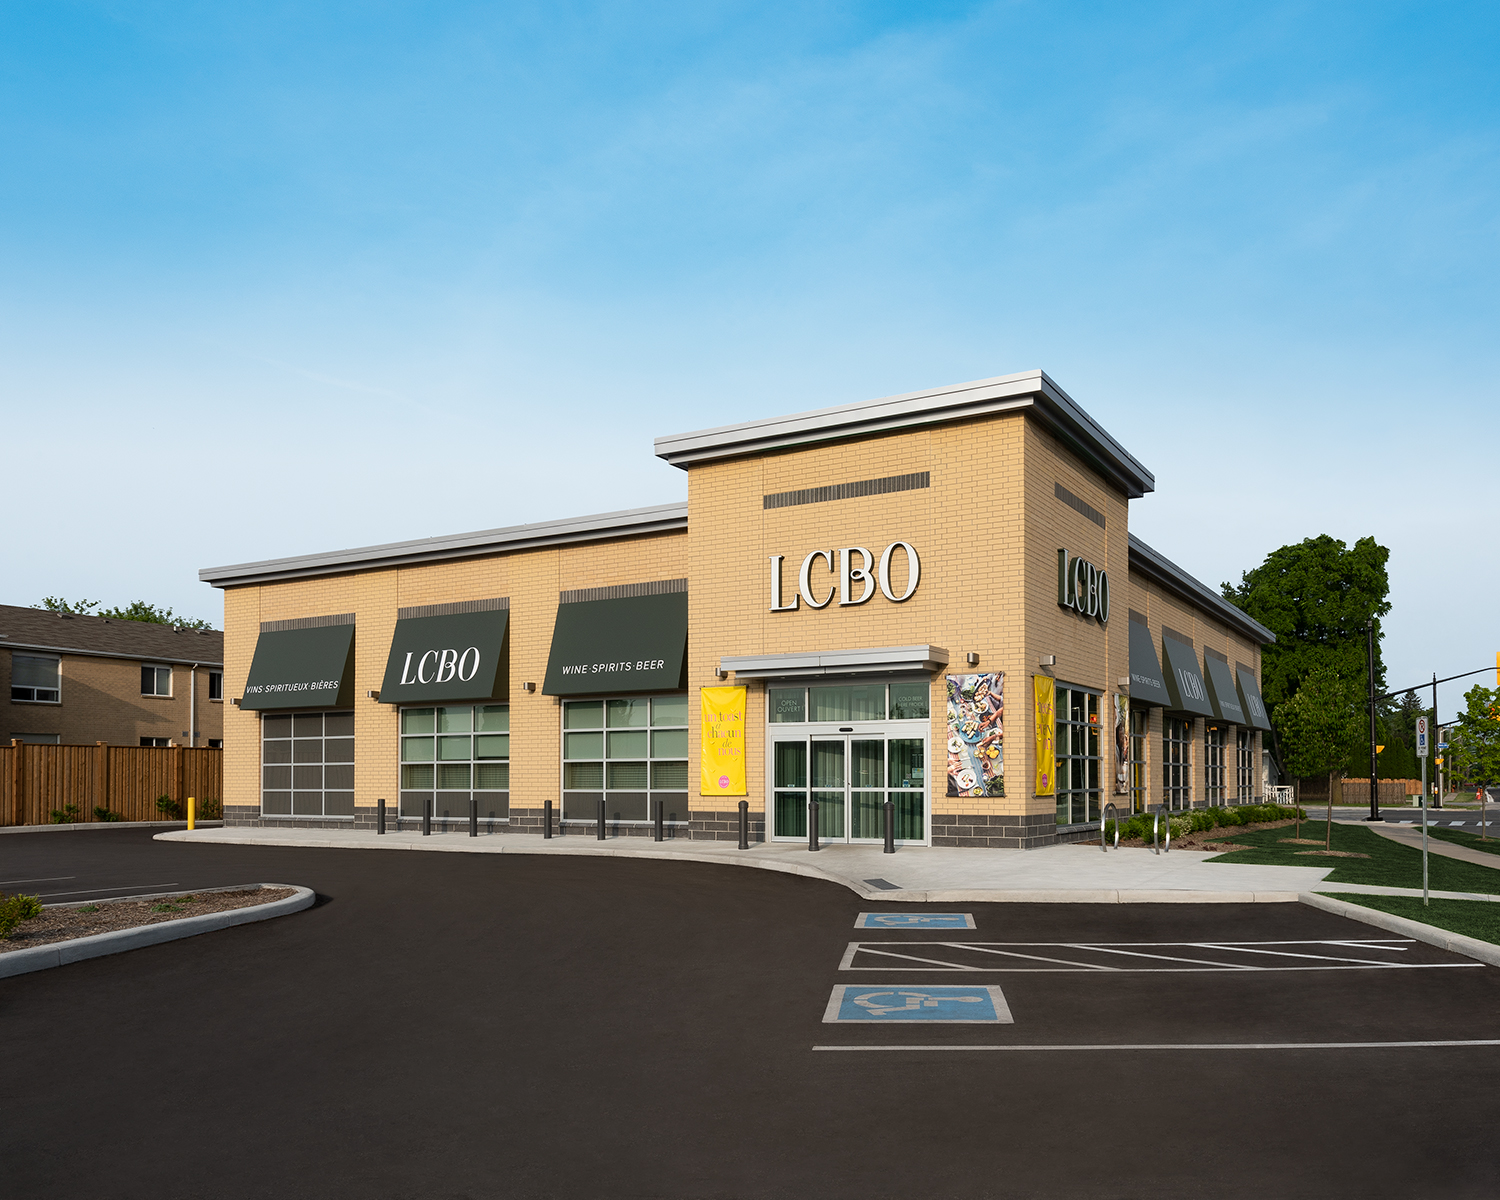 20180613-RC-LCBO-1500px